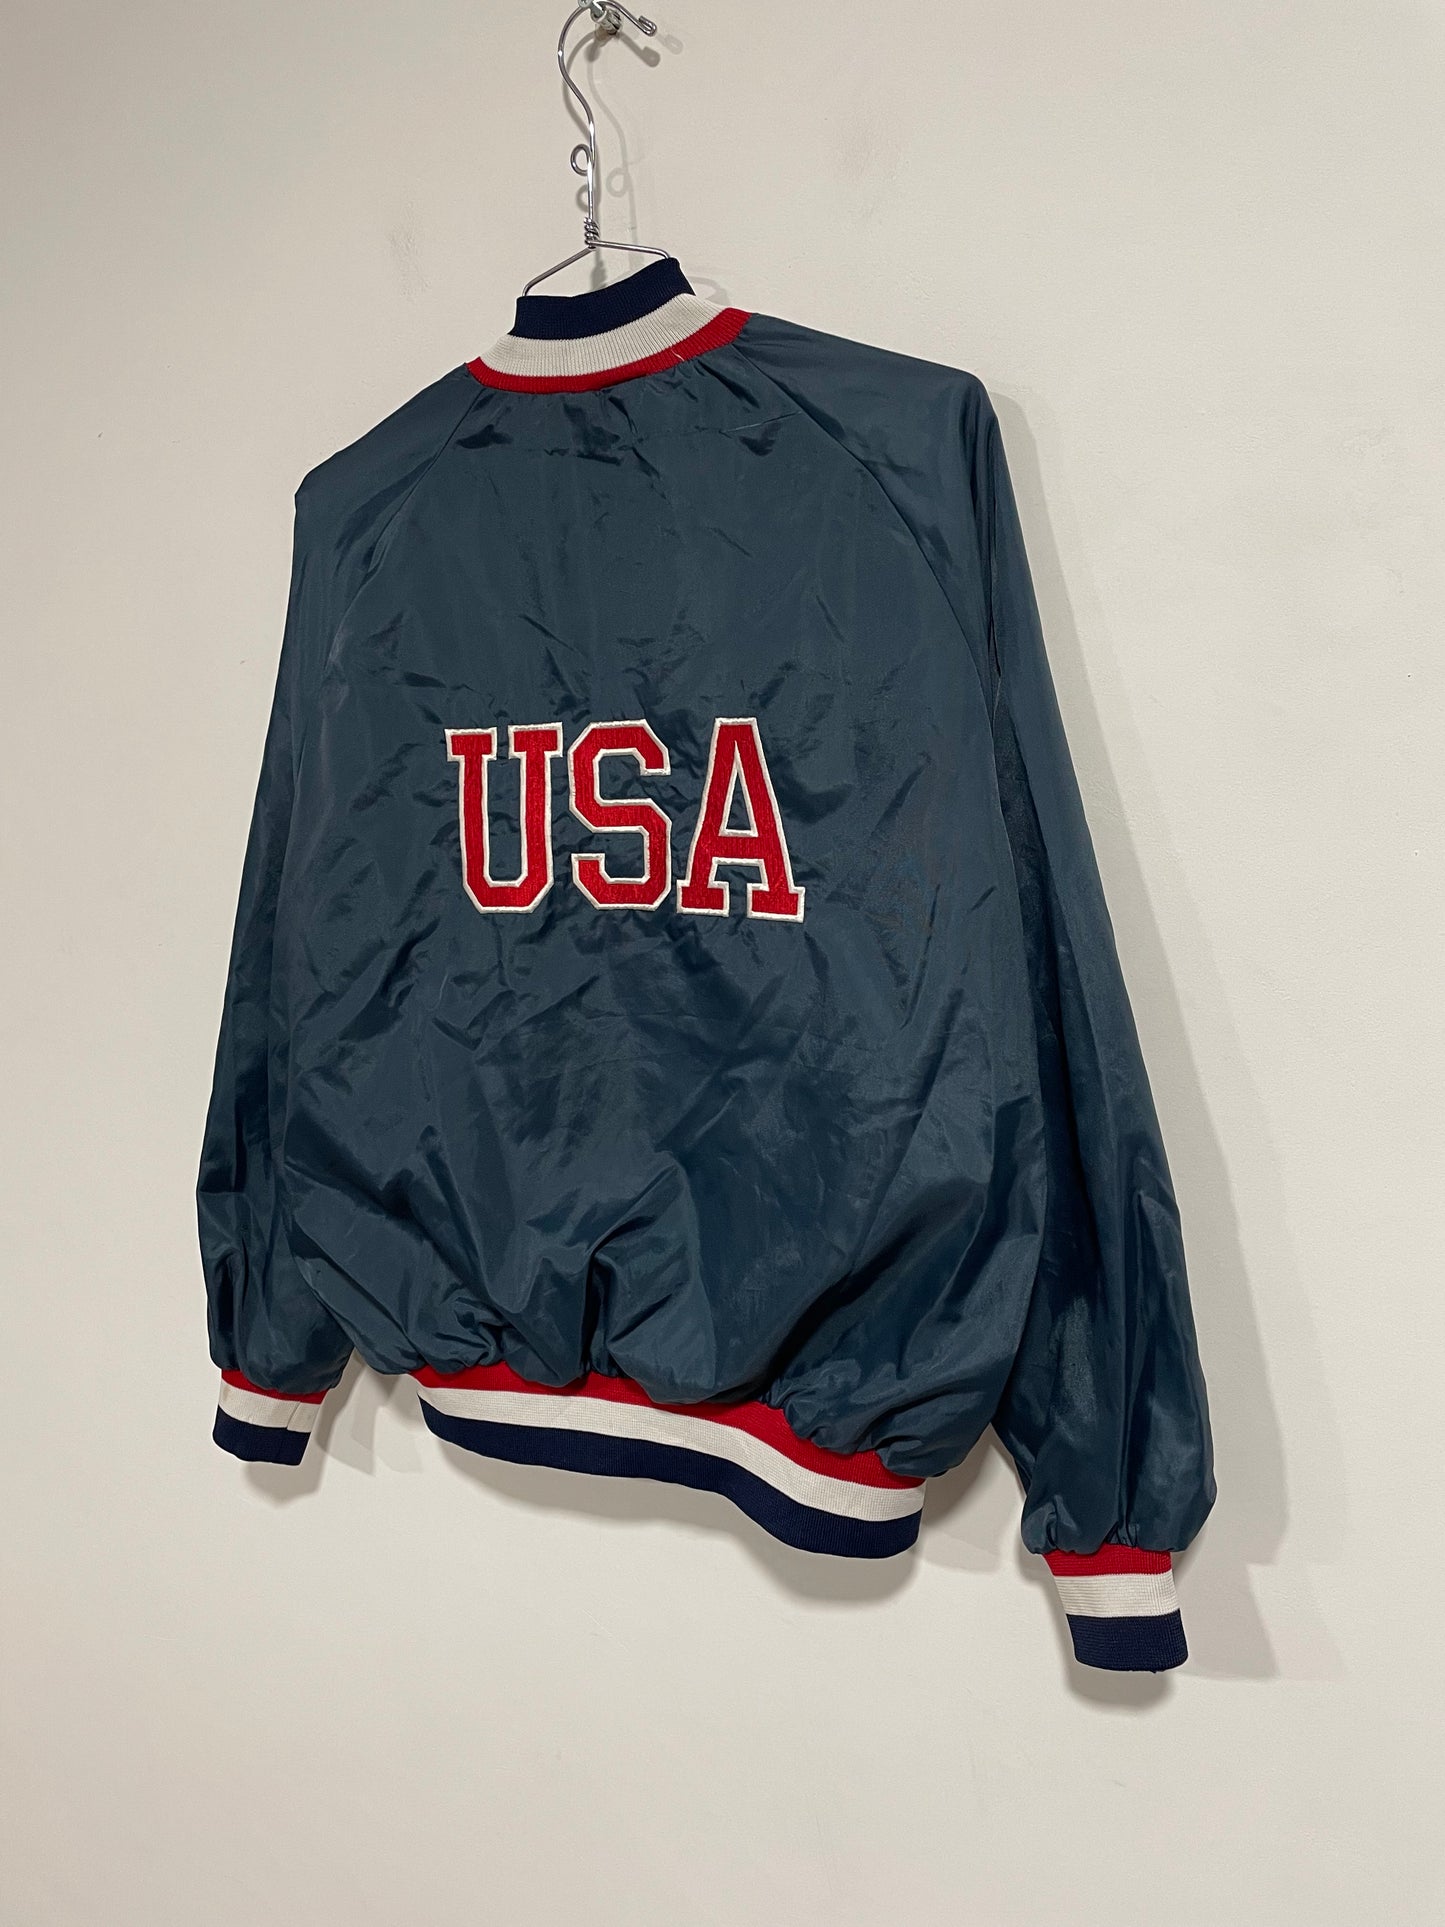 Bomberino Lee made in USA official Olympic training center (C991)